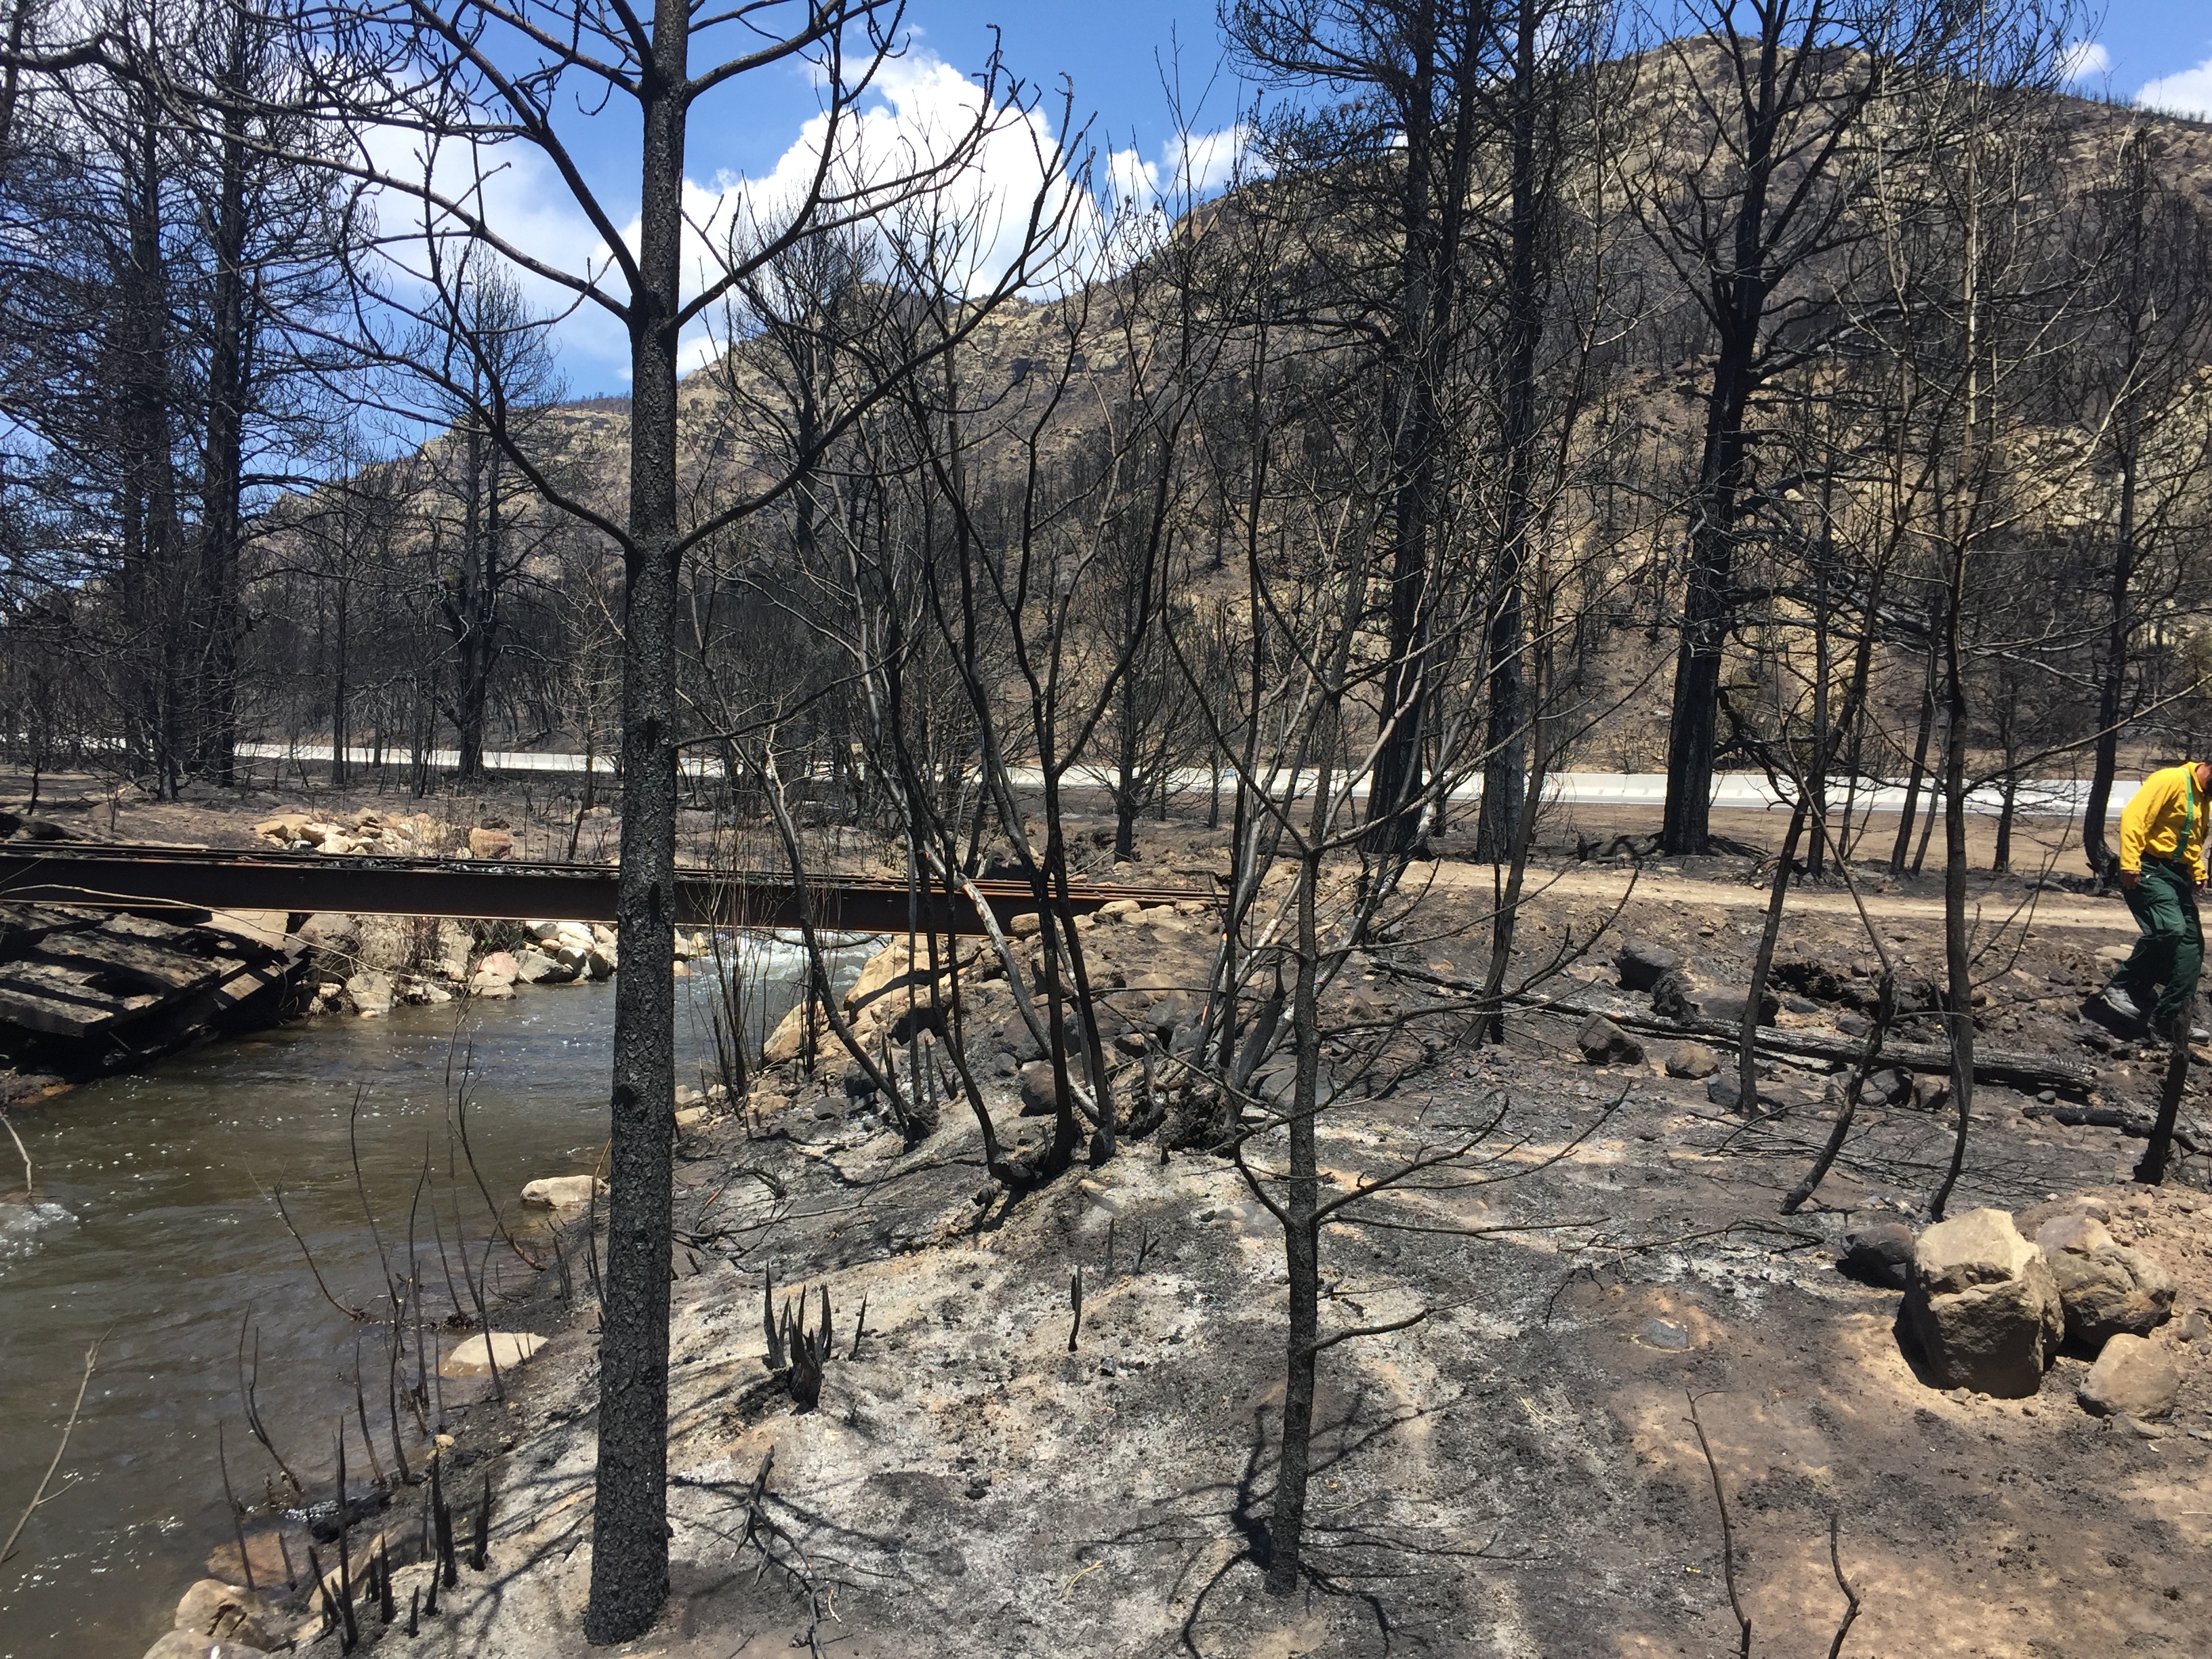 Burn damage caused by the Ute Park Fire